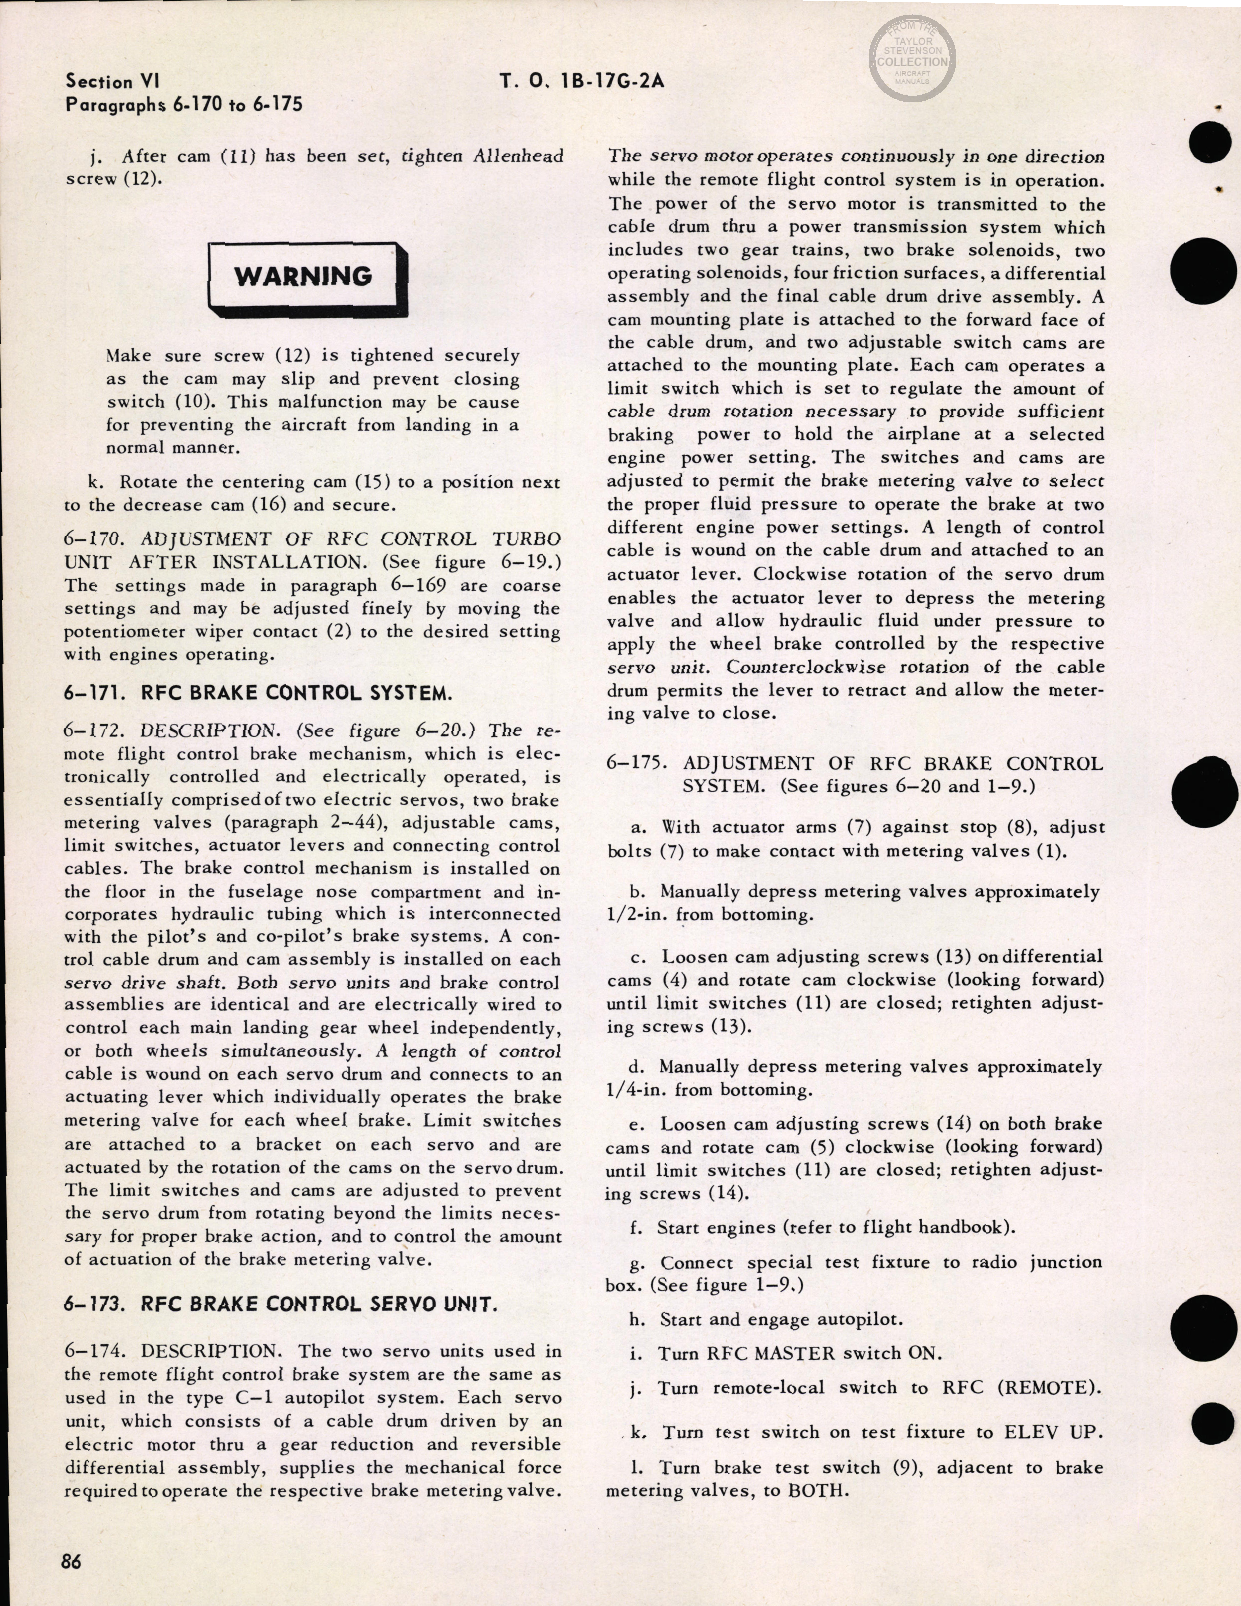 Sample page 92 from AirCorps Library document: Supplemental Handbook Maintenance Instructions - QB-17